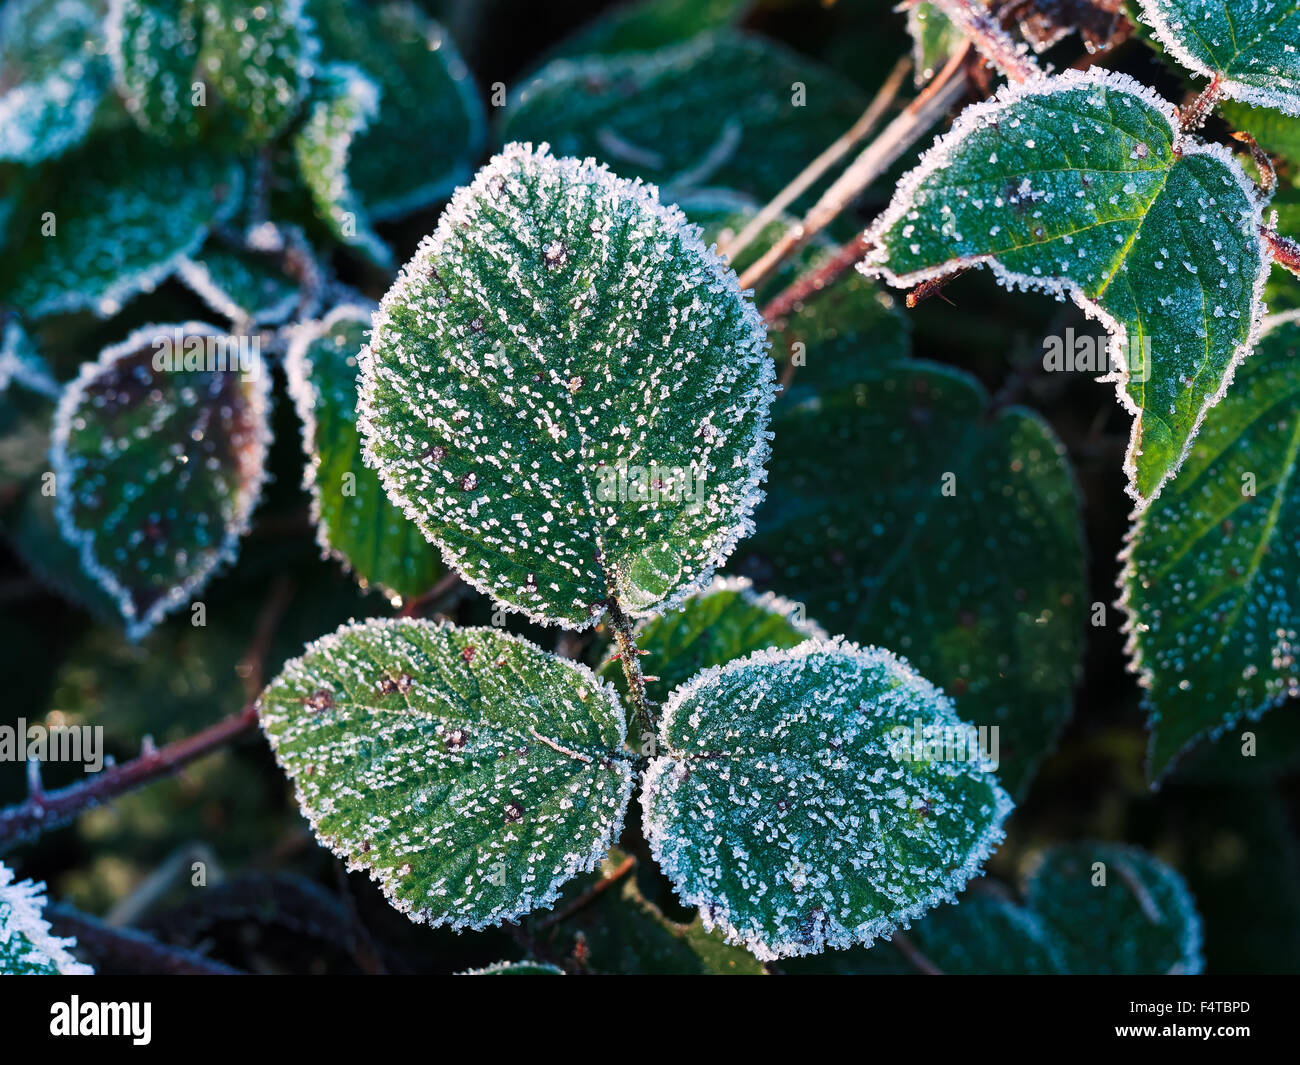 Blackberry leaf with hoarfrost Stock Photo